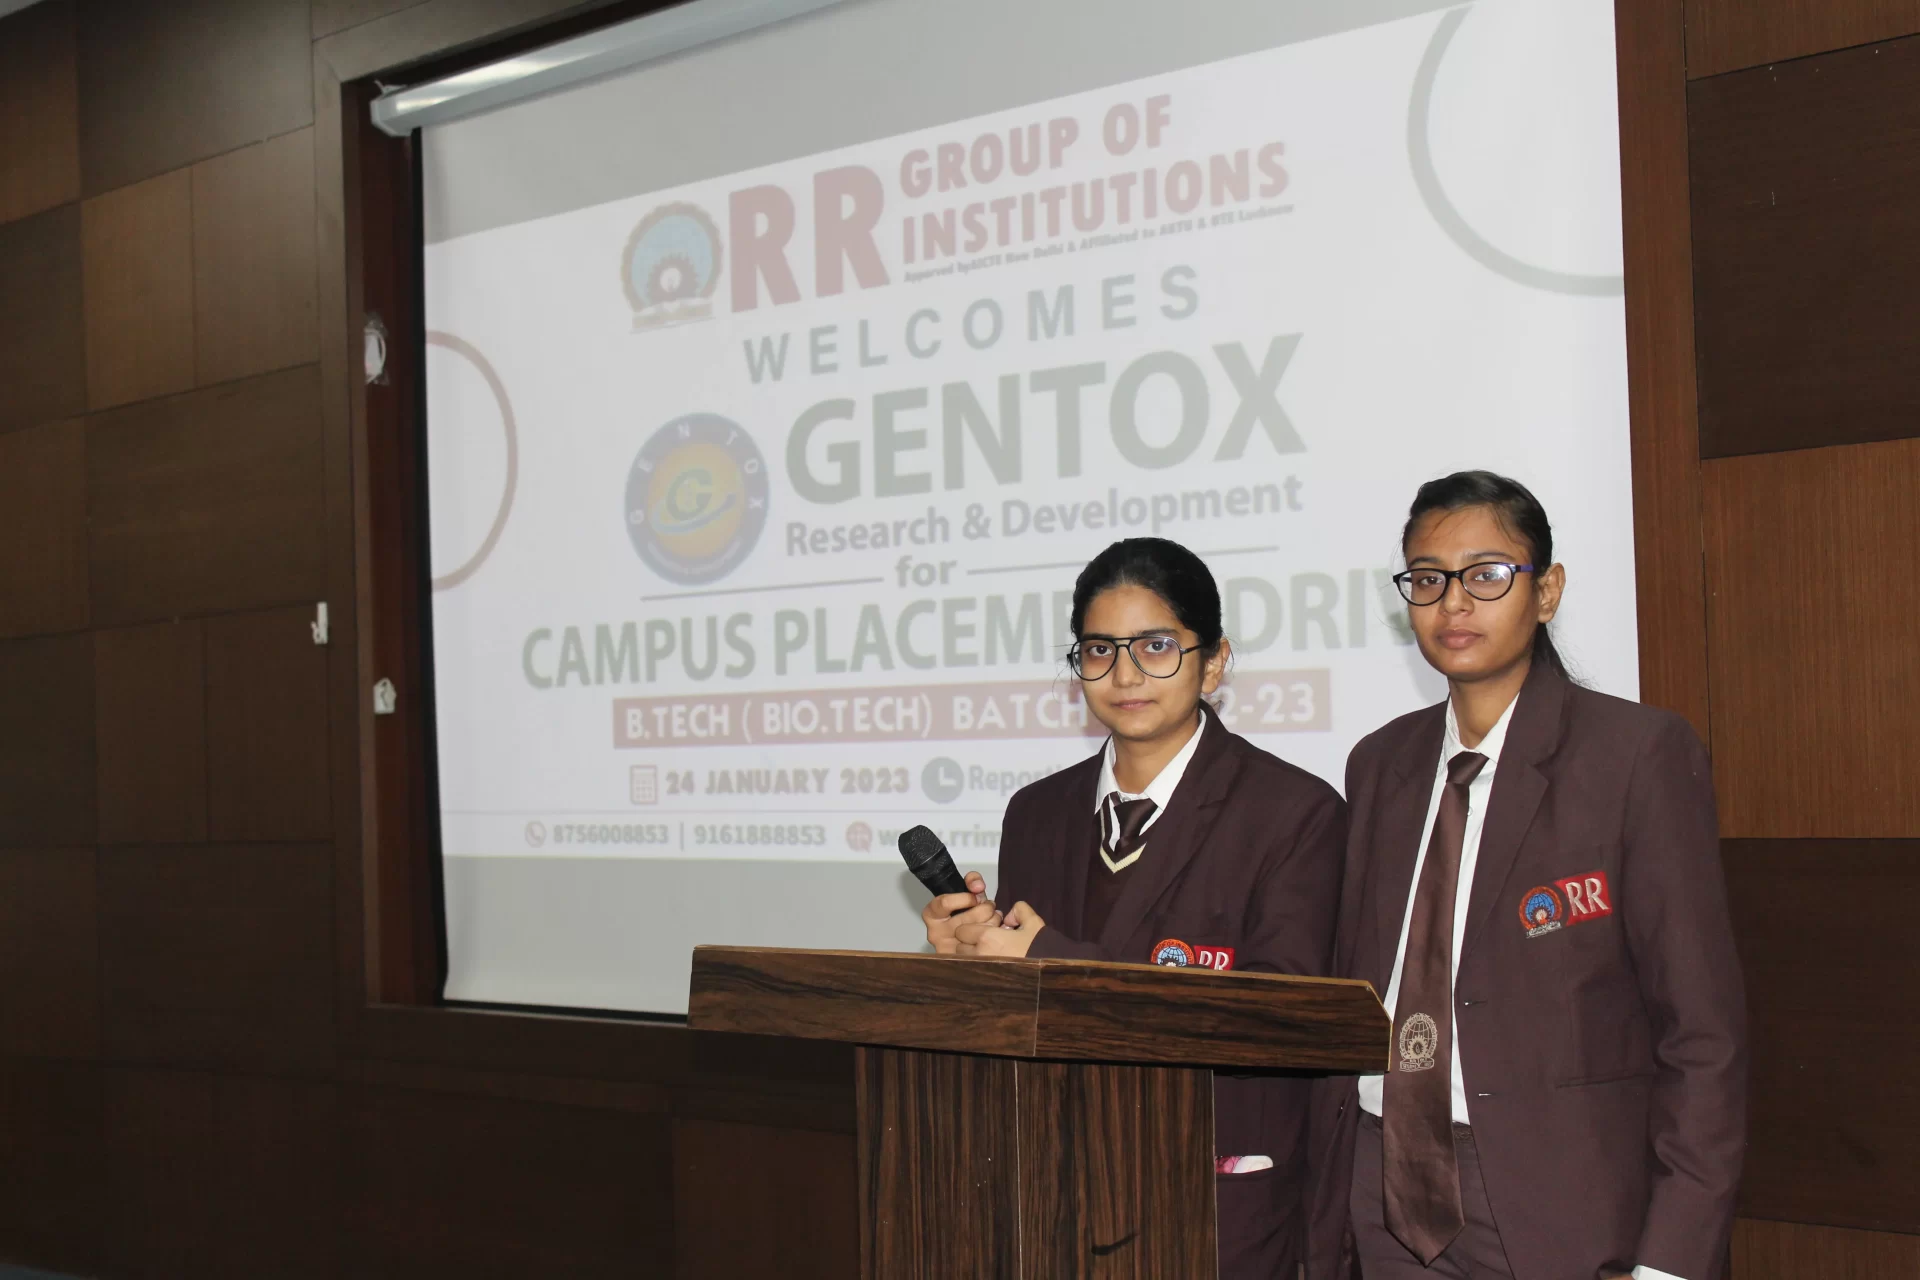 Campus Placement Drive by Gentox